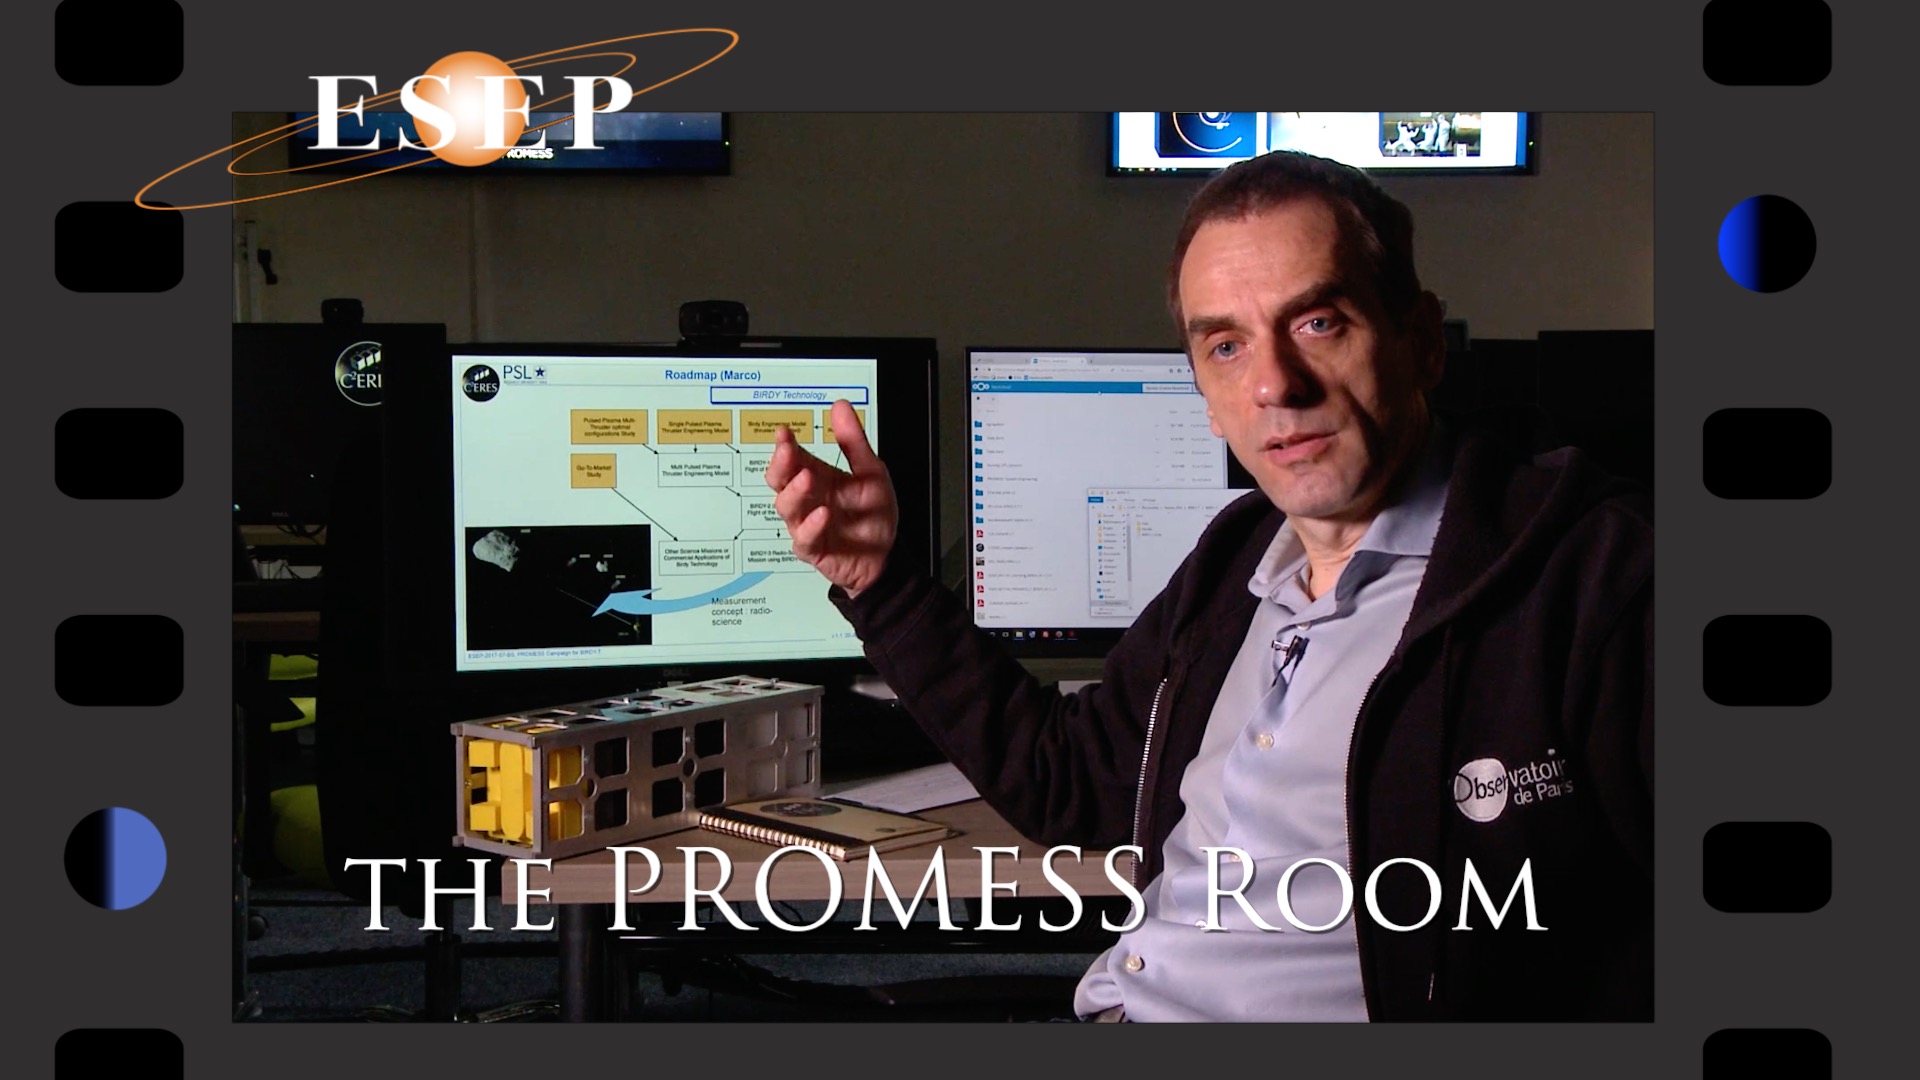 The ESEP PROMESS room